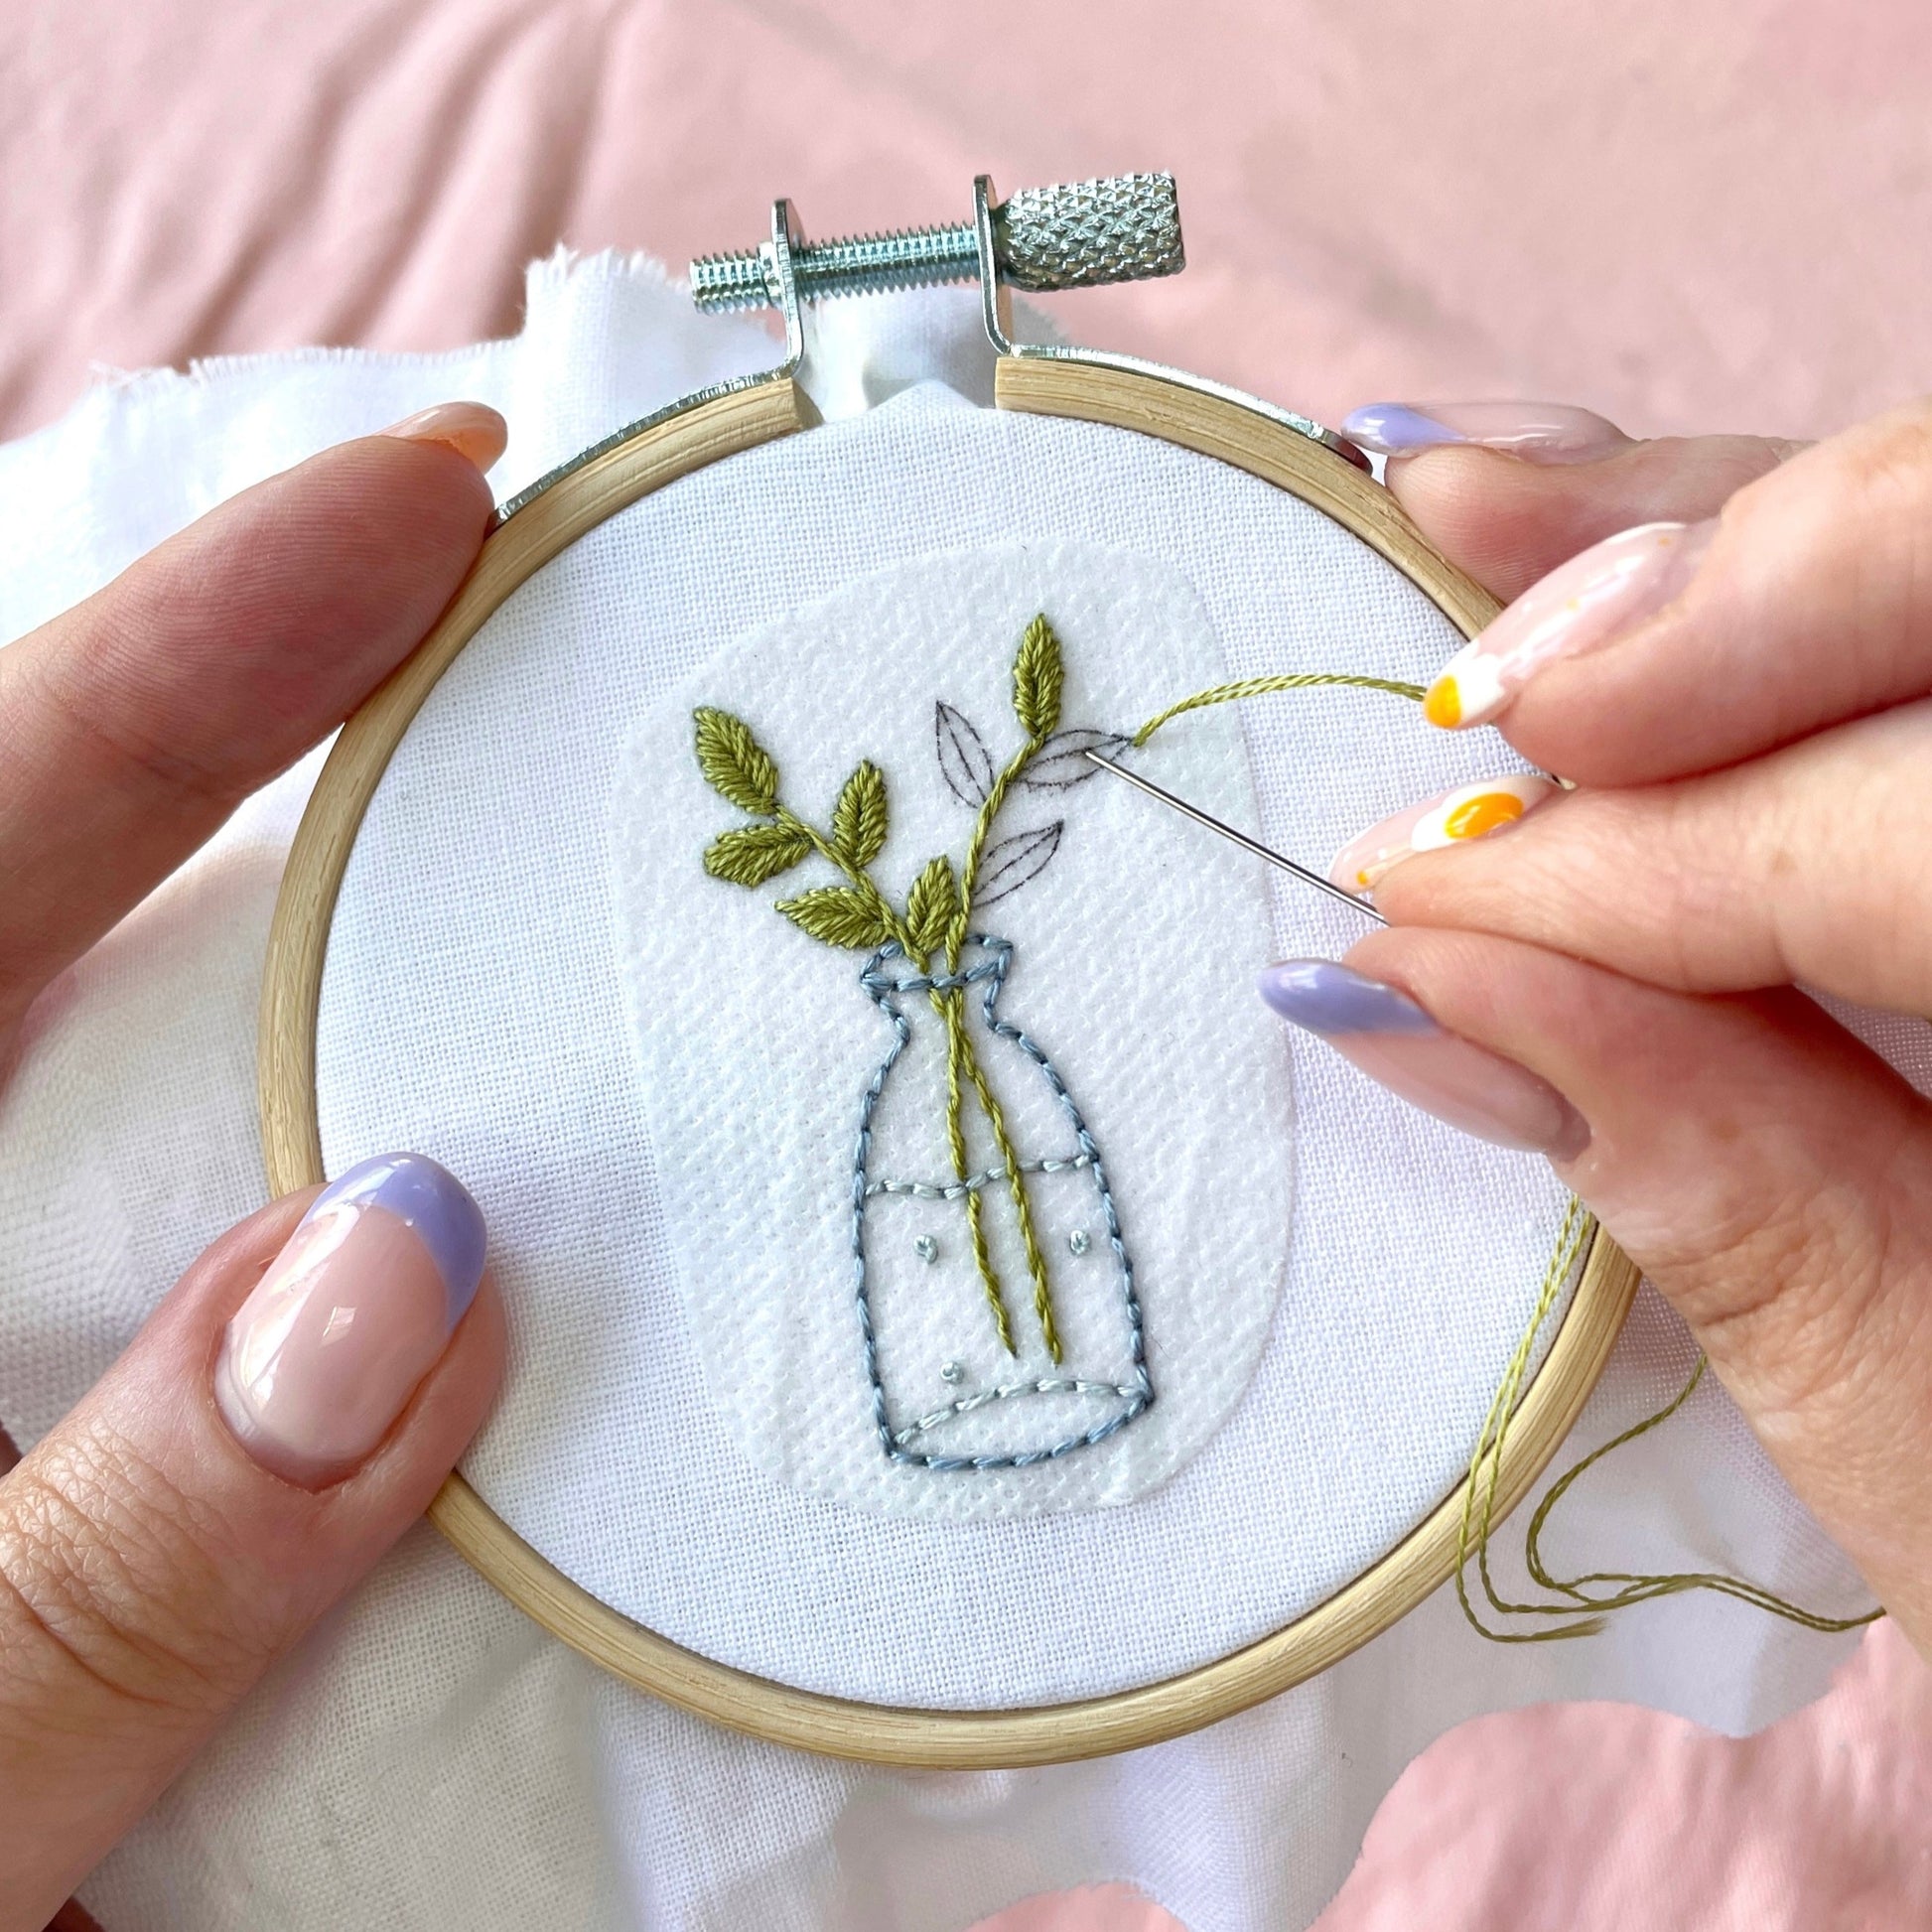 Stick and Stitch Embroidery Designs